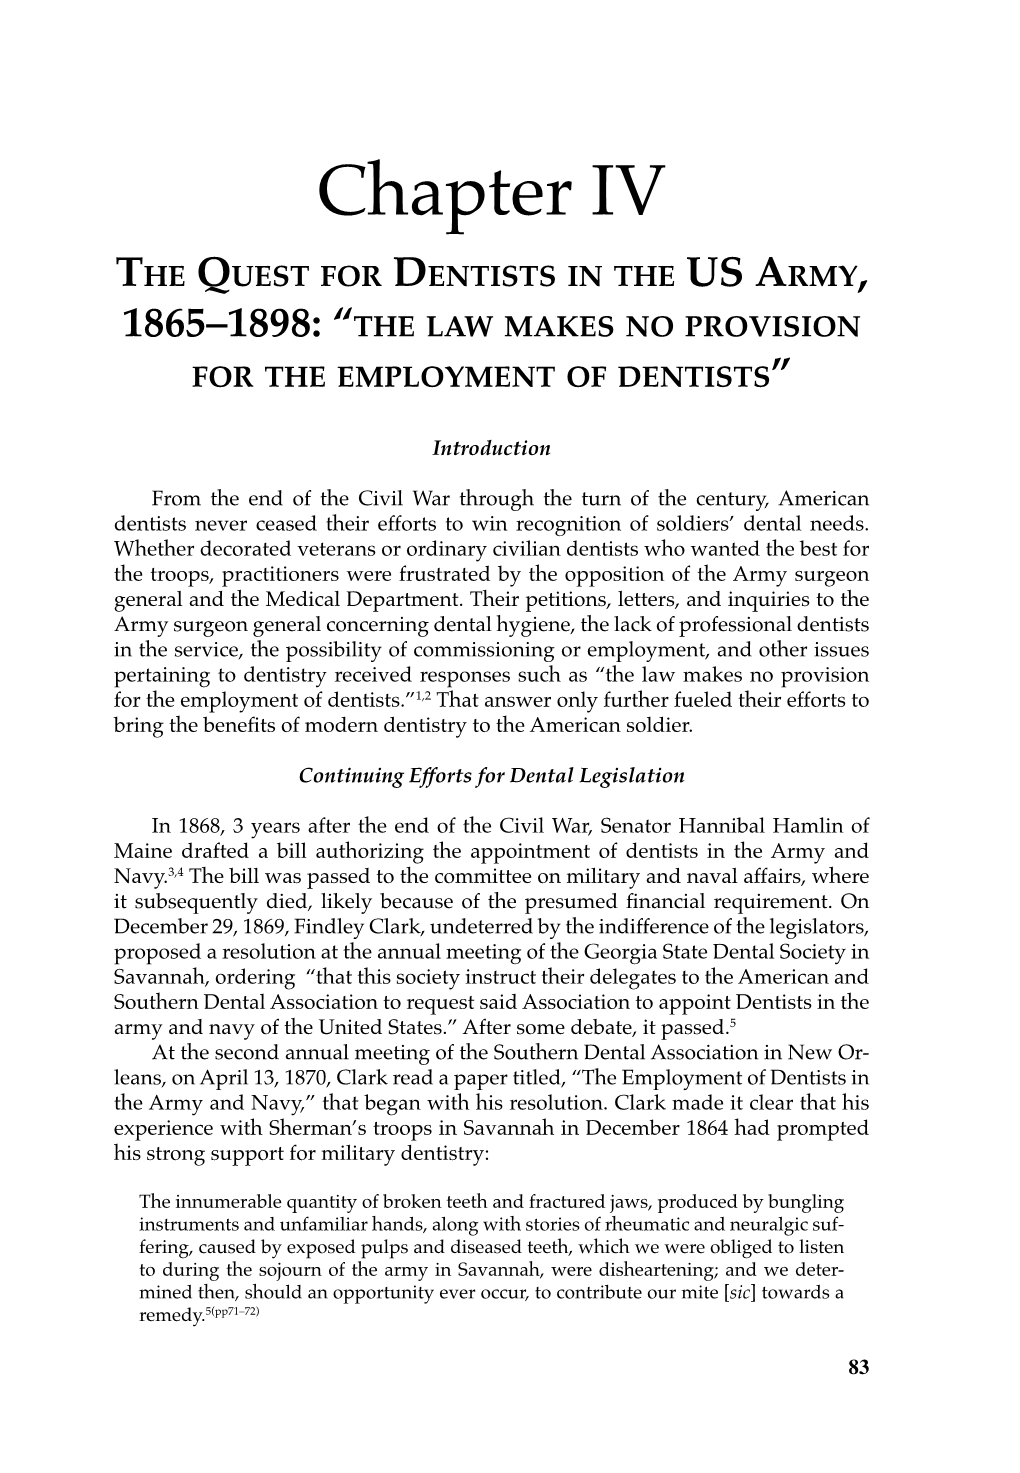 Chapter IV, the Quest for Dentists in the US Army, 1865–1898: the Law